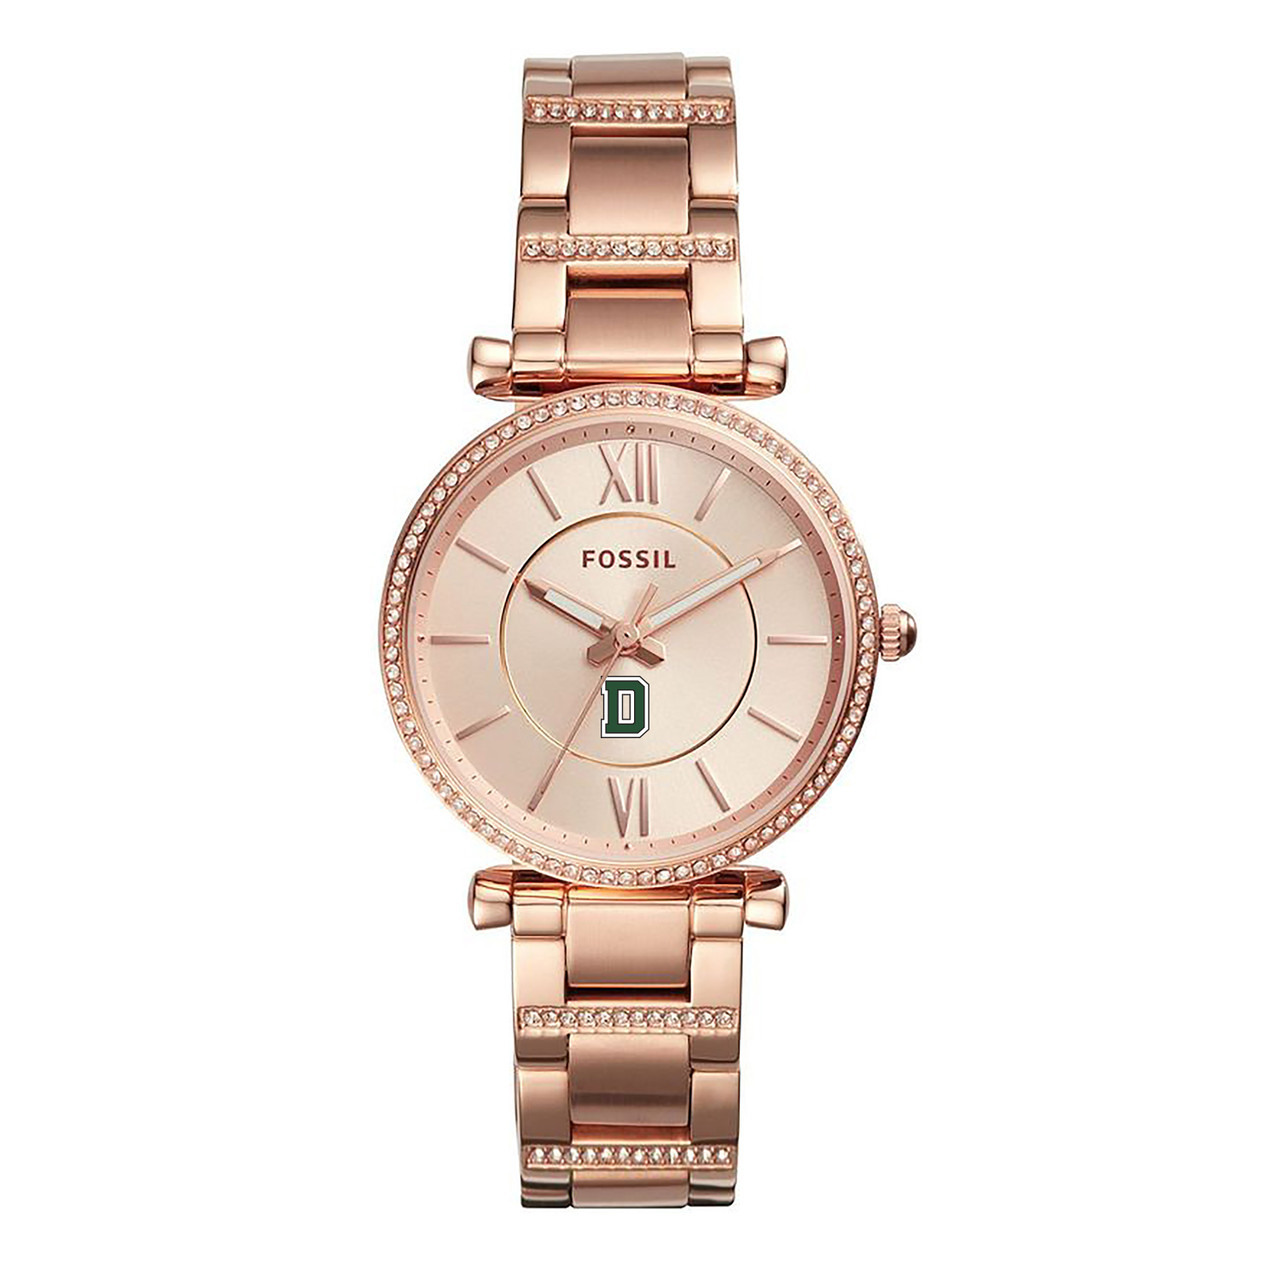 Fossil Jacqueline Watch - Women's Watches in Gold Teal | Buckle